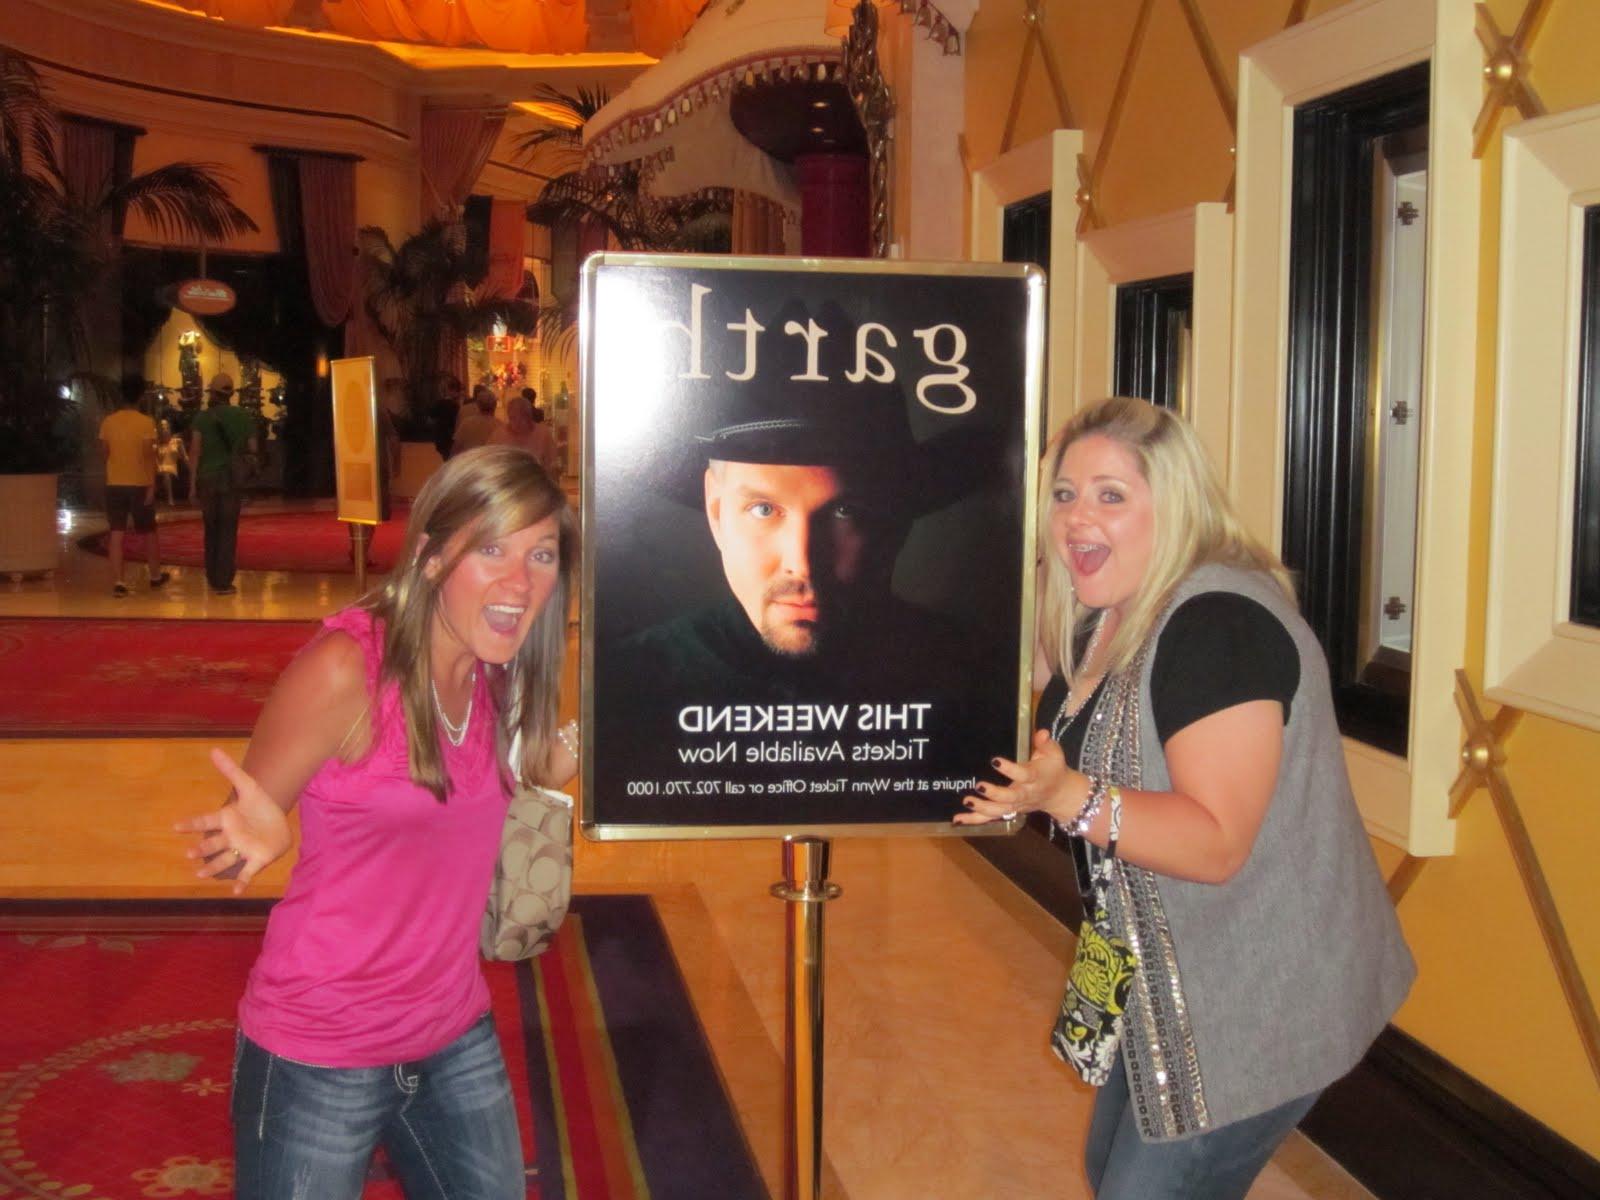 His concert at the Wynn Encore